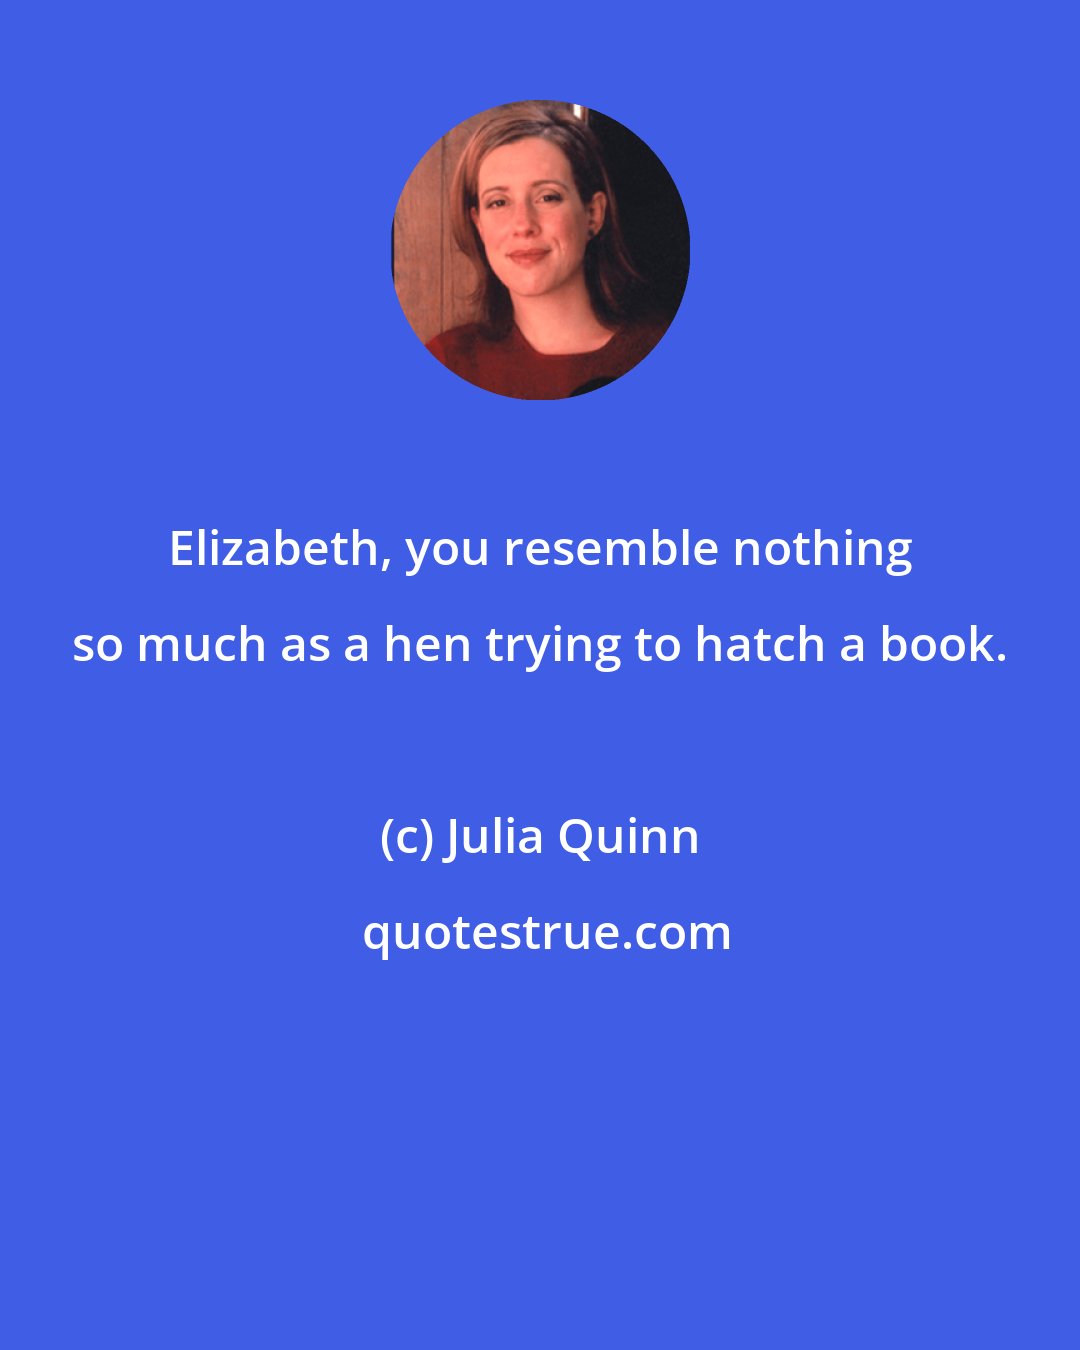 Julia Quinn: Elizabeth, you resemble nothing so much as a hen trying to hatch a book.